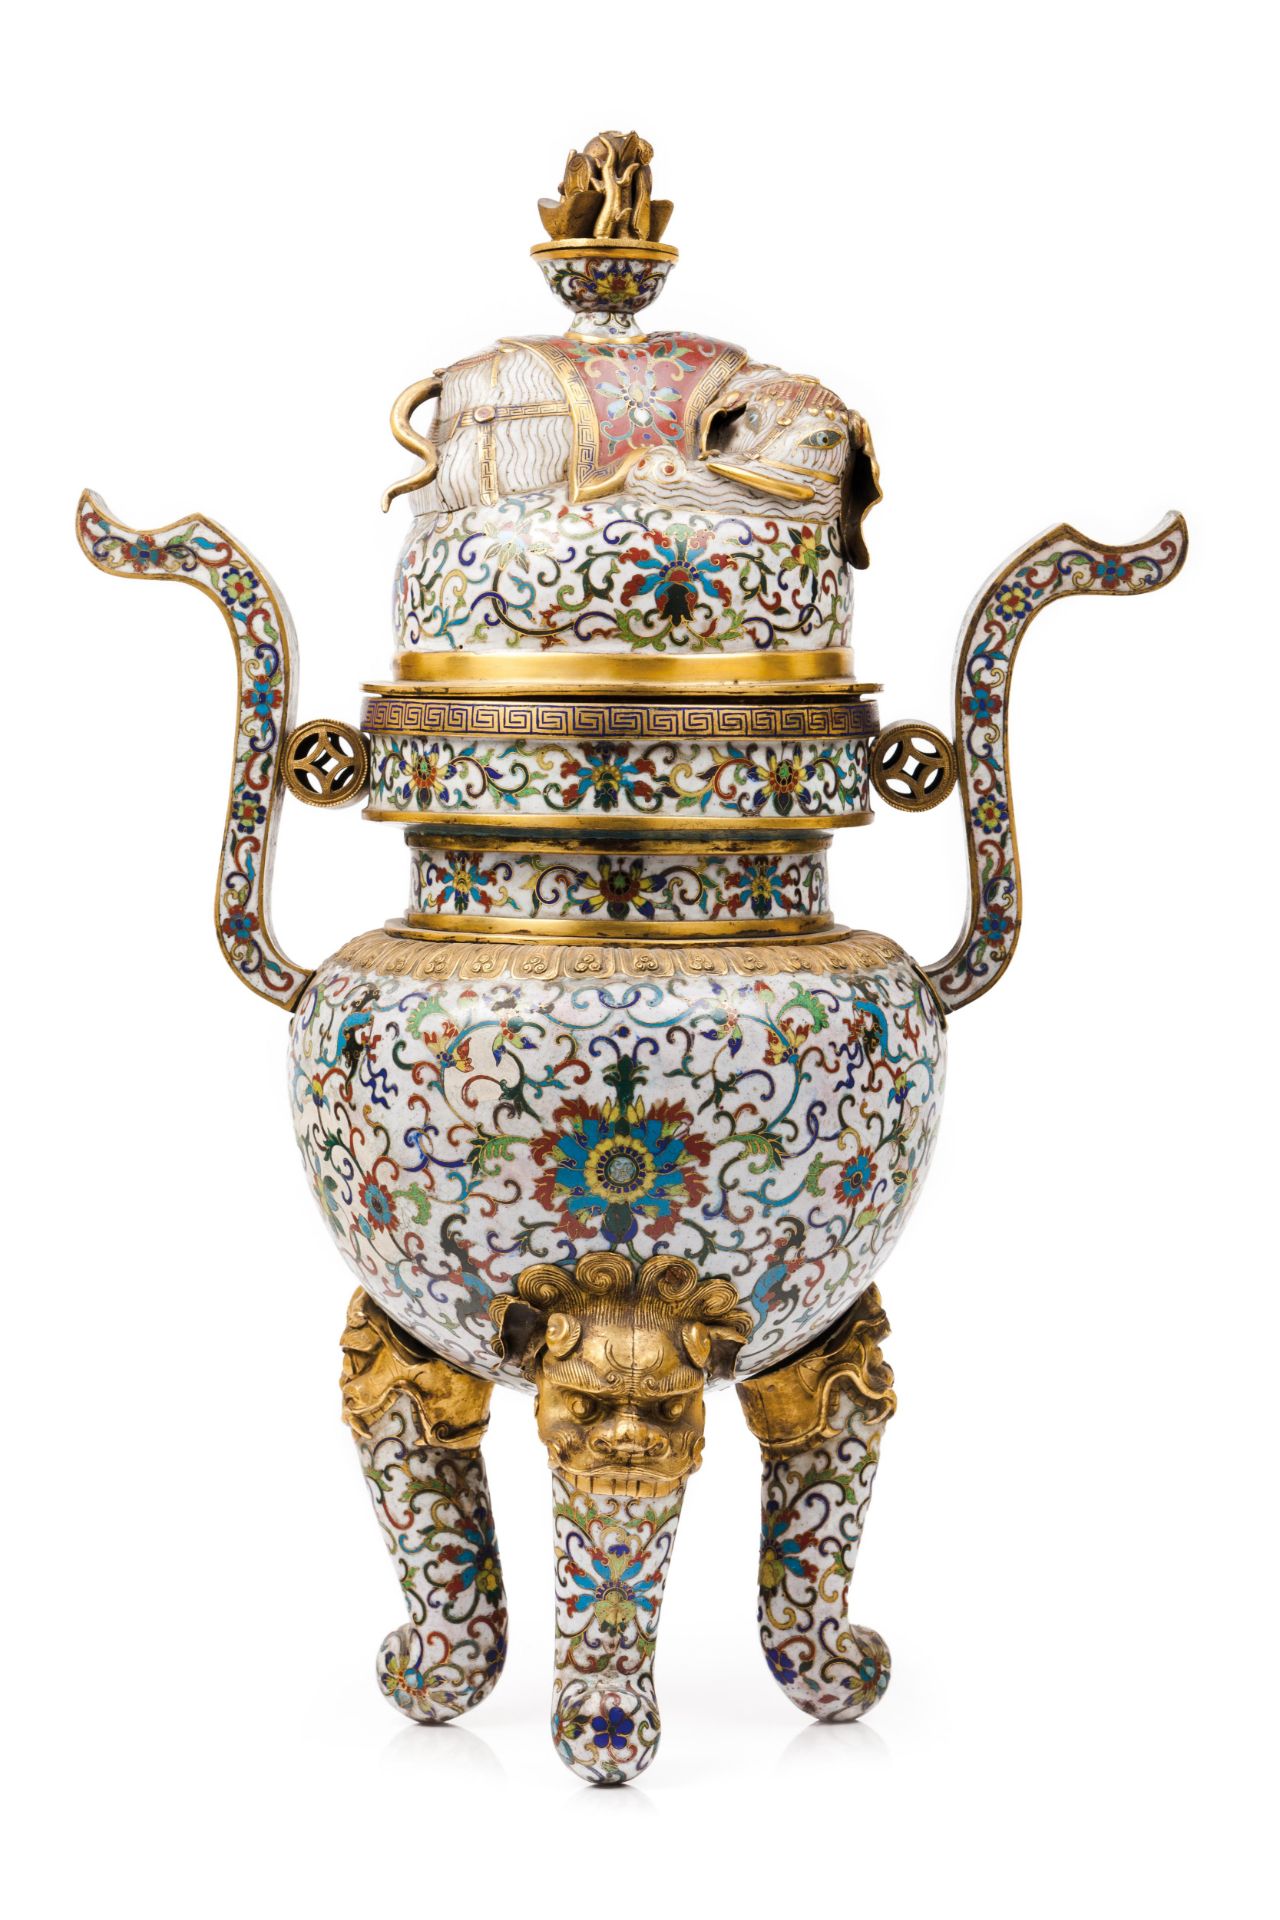 A large cloisonné incense burner with cover